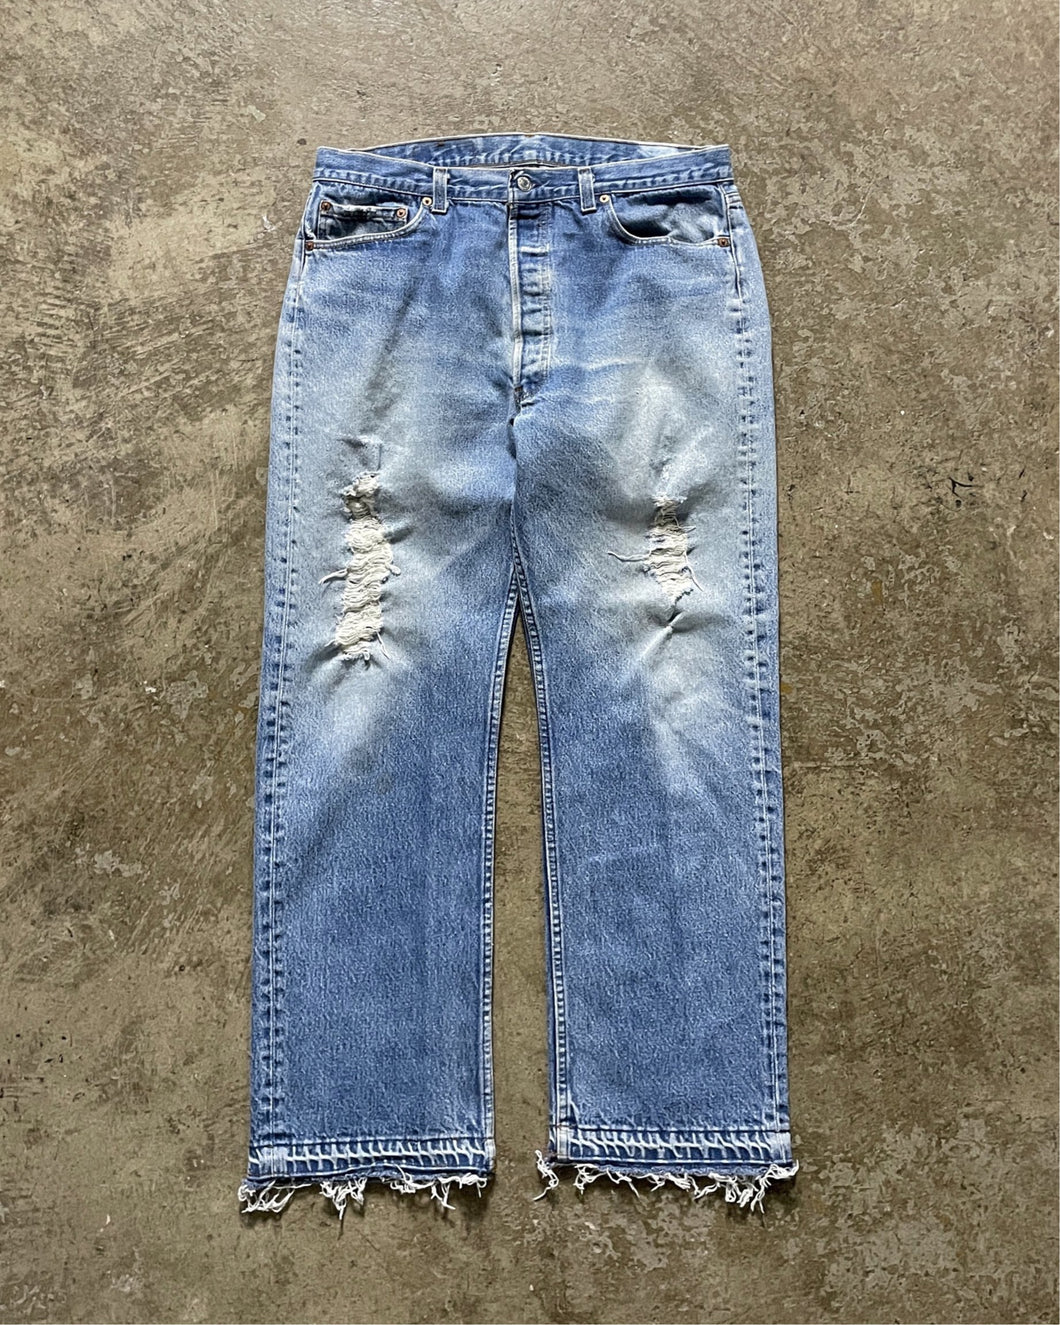 LEVI’S 501 DISTRESSED ANS FADED JEANS - 1980S